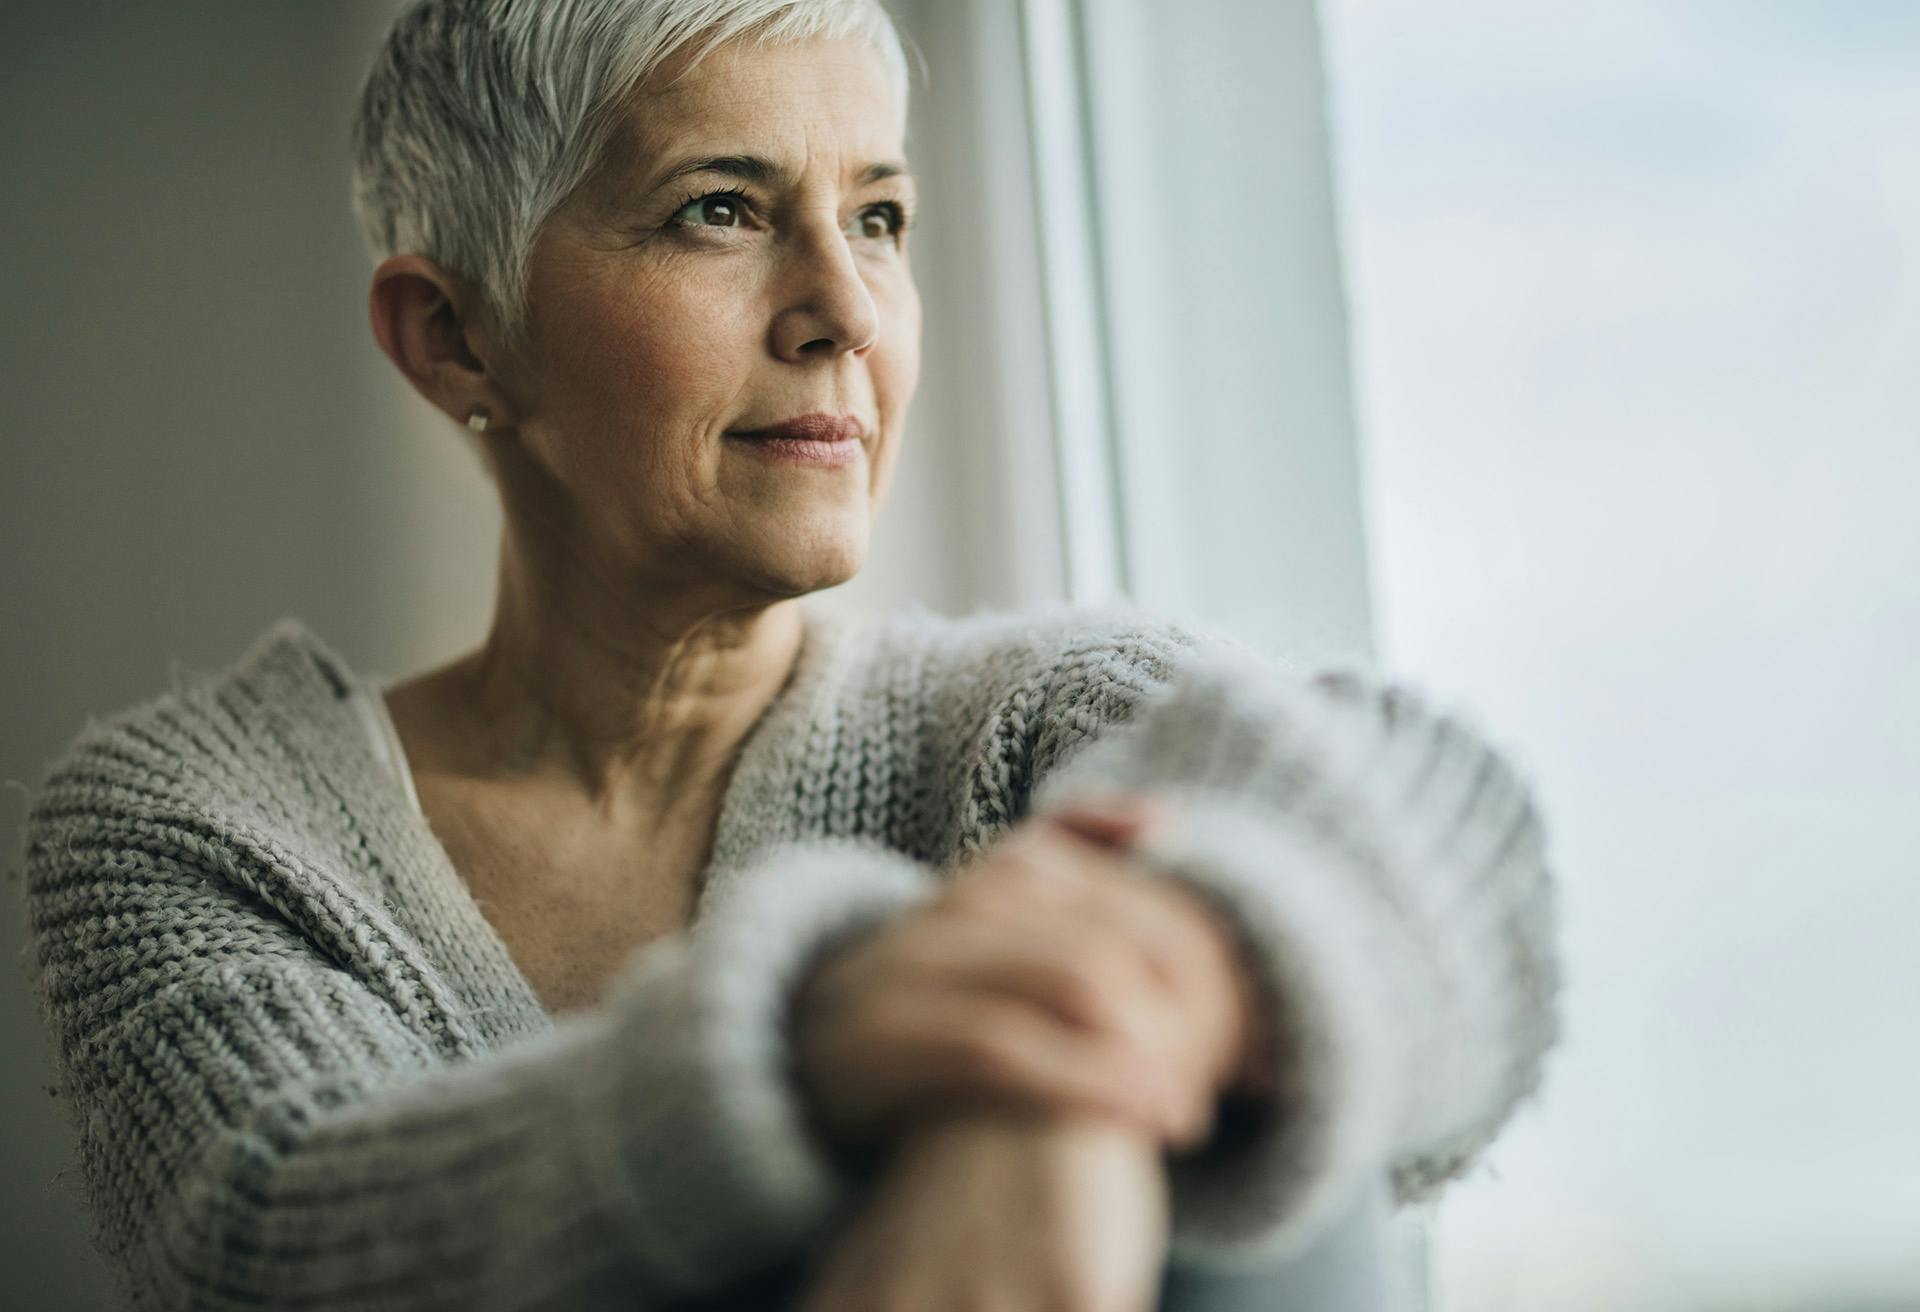 Grey haired woman looking out the window and smiling.